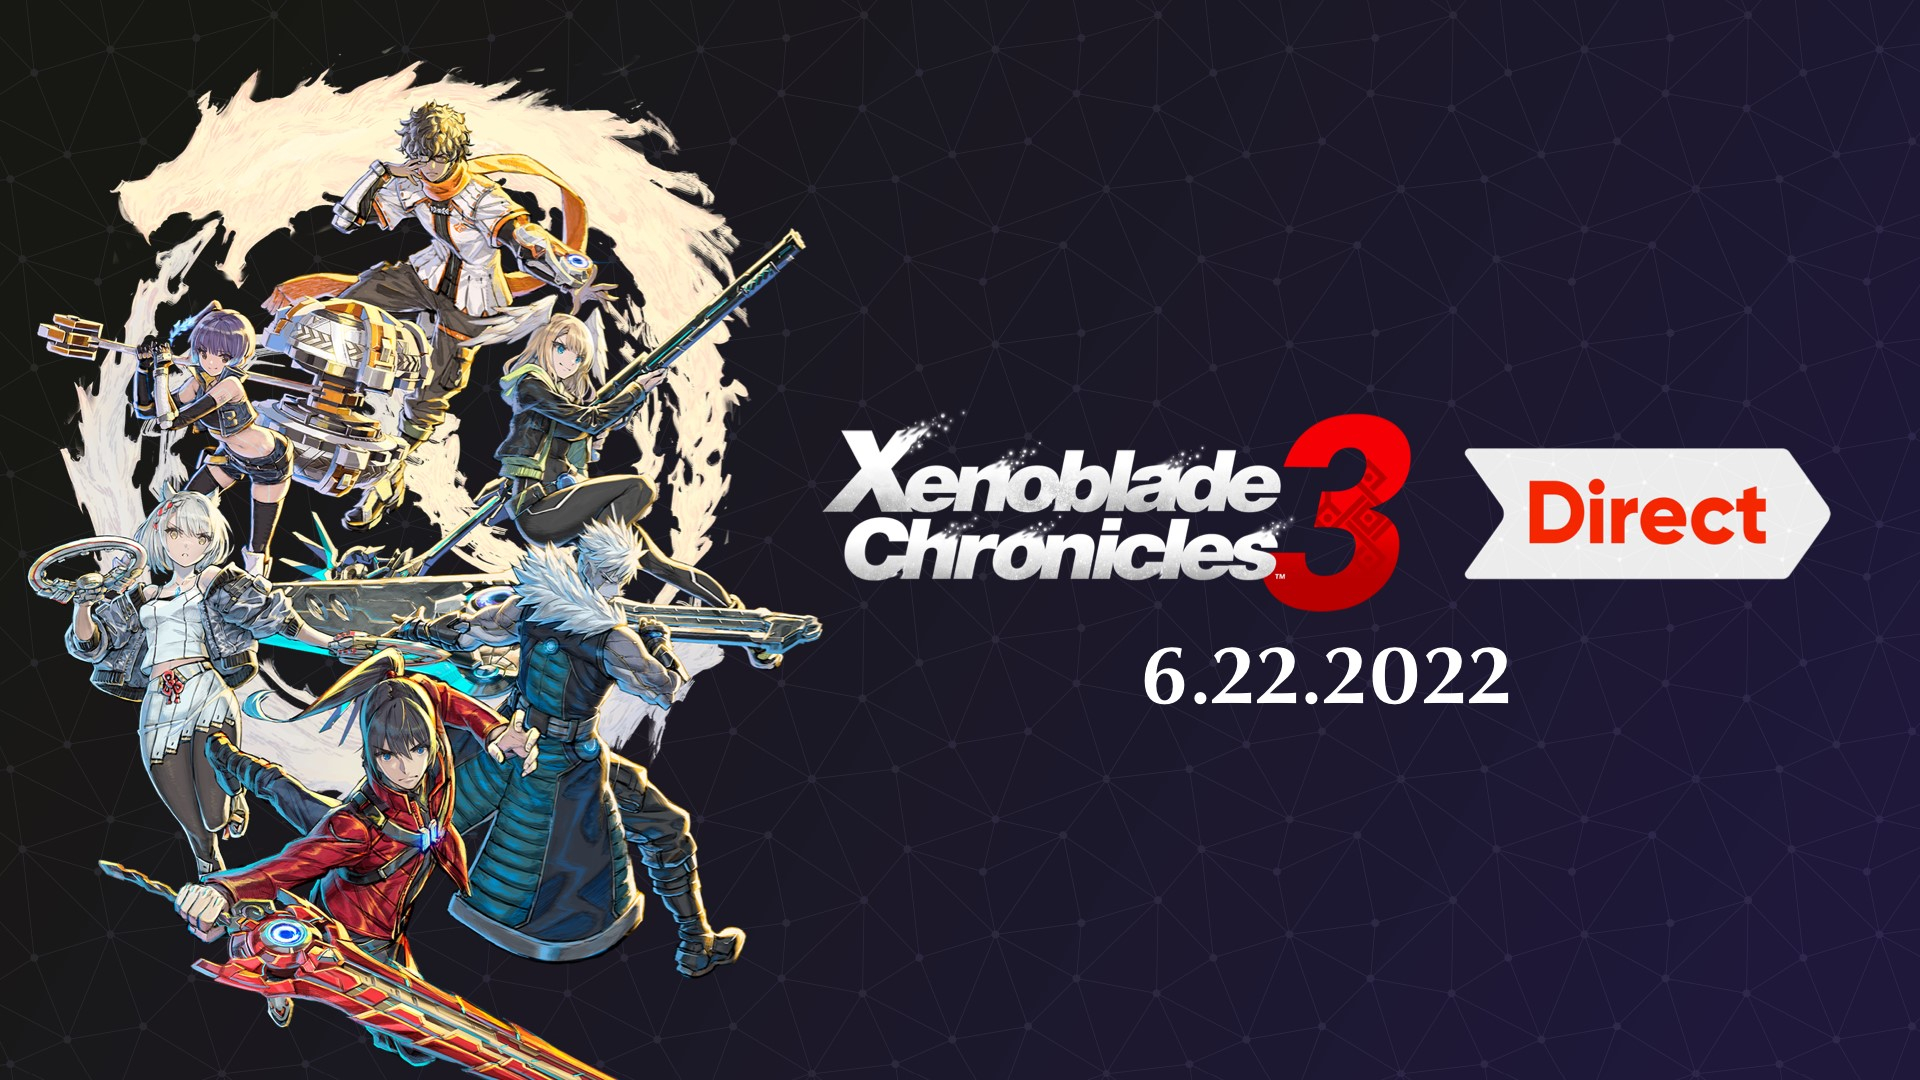 Nintendo Unveils Xenoblade Chronicles 3 Direct Presentation Packed With New  Footage and Details | Business Wire